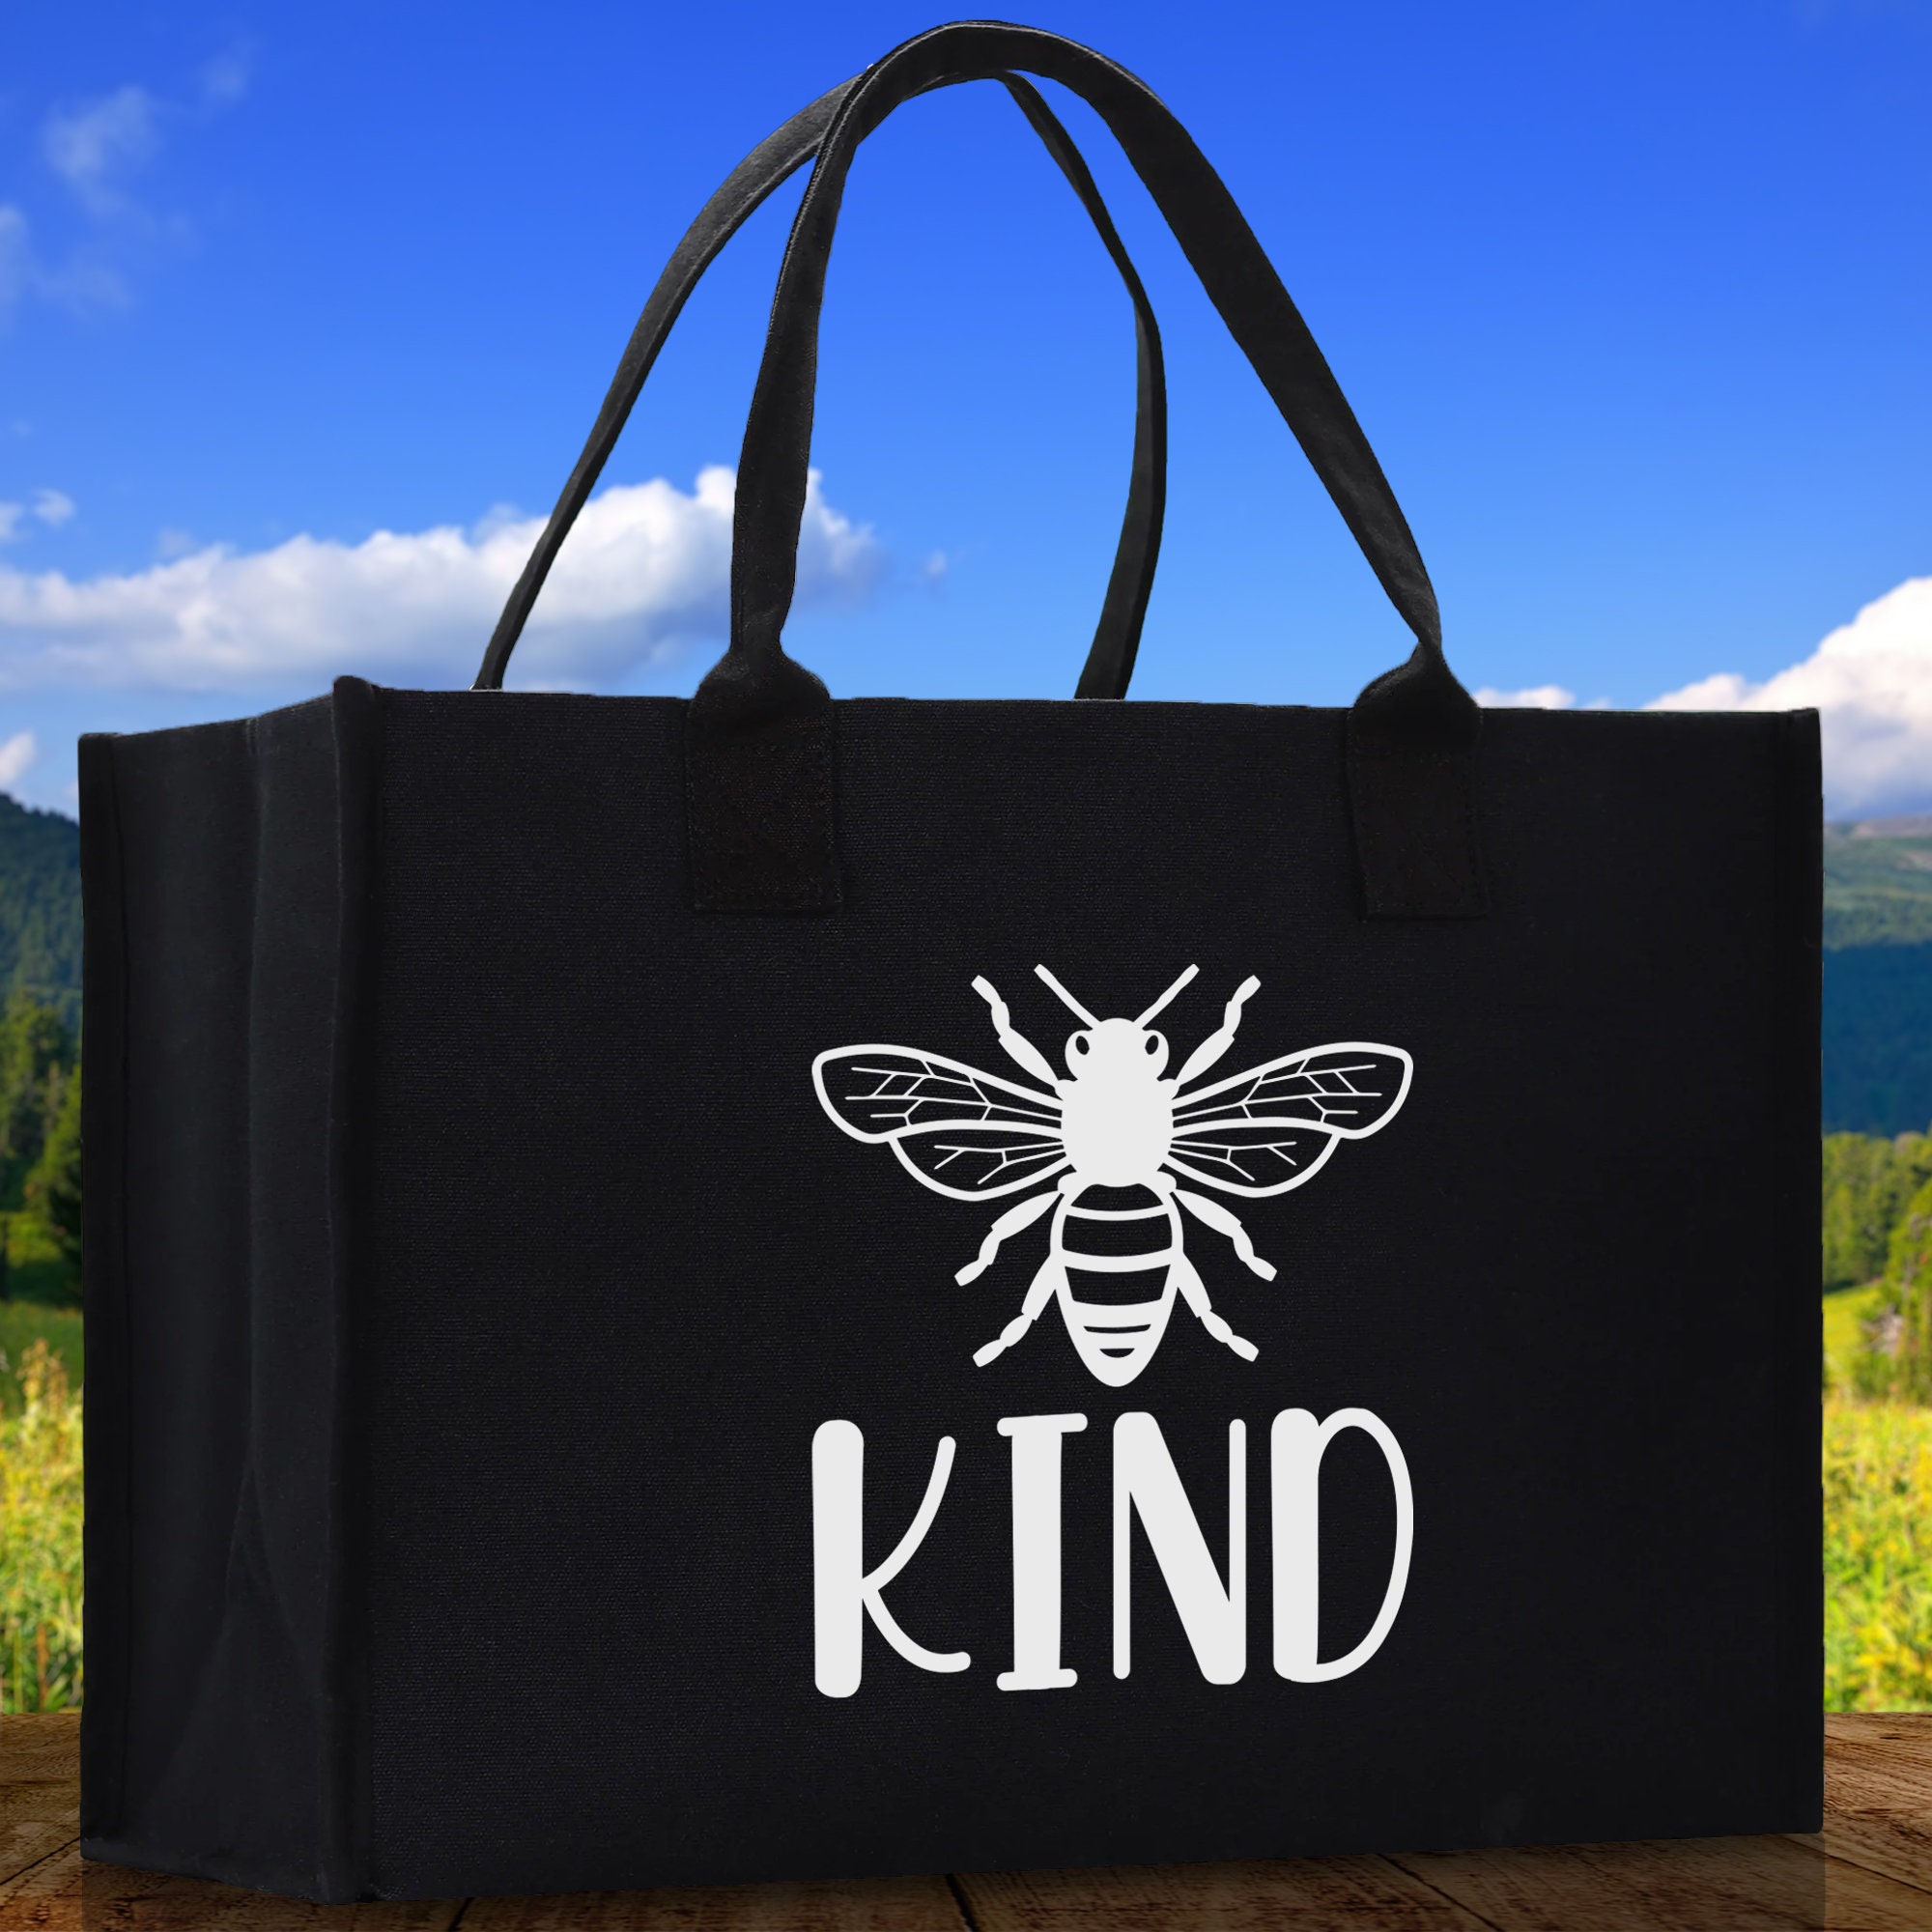 Drink Hiver Save Bees Tote Bag